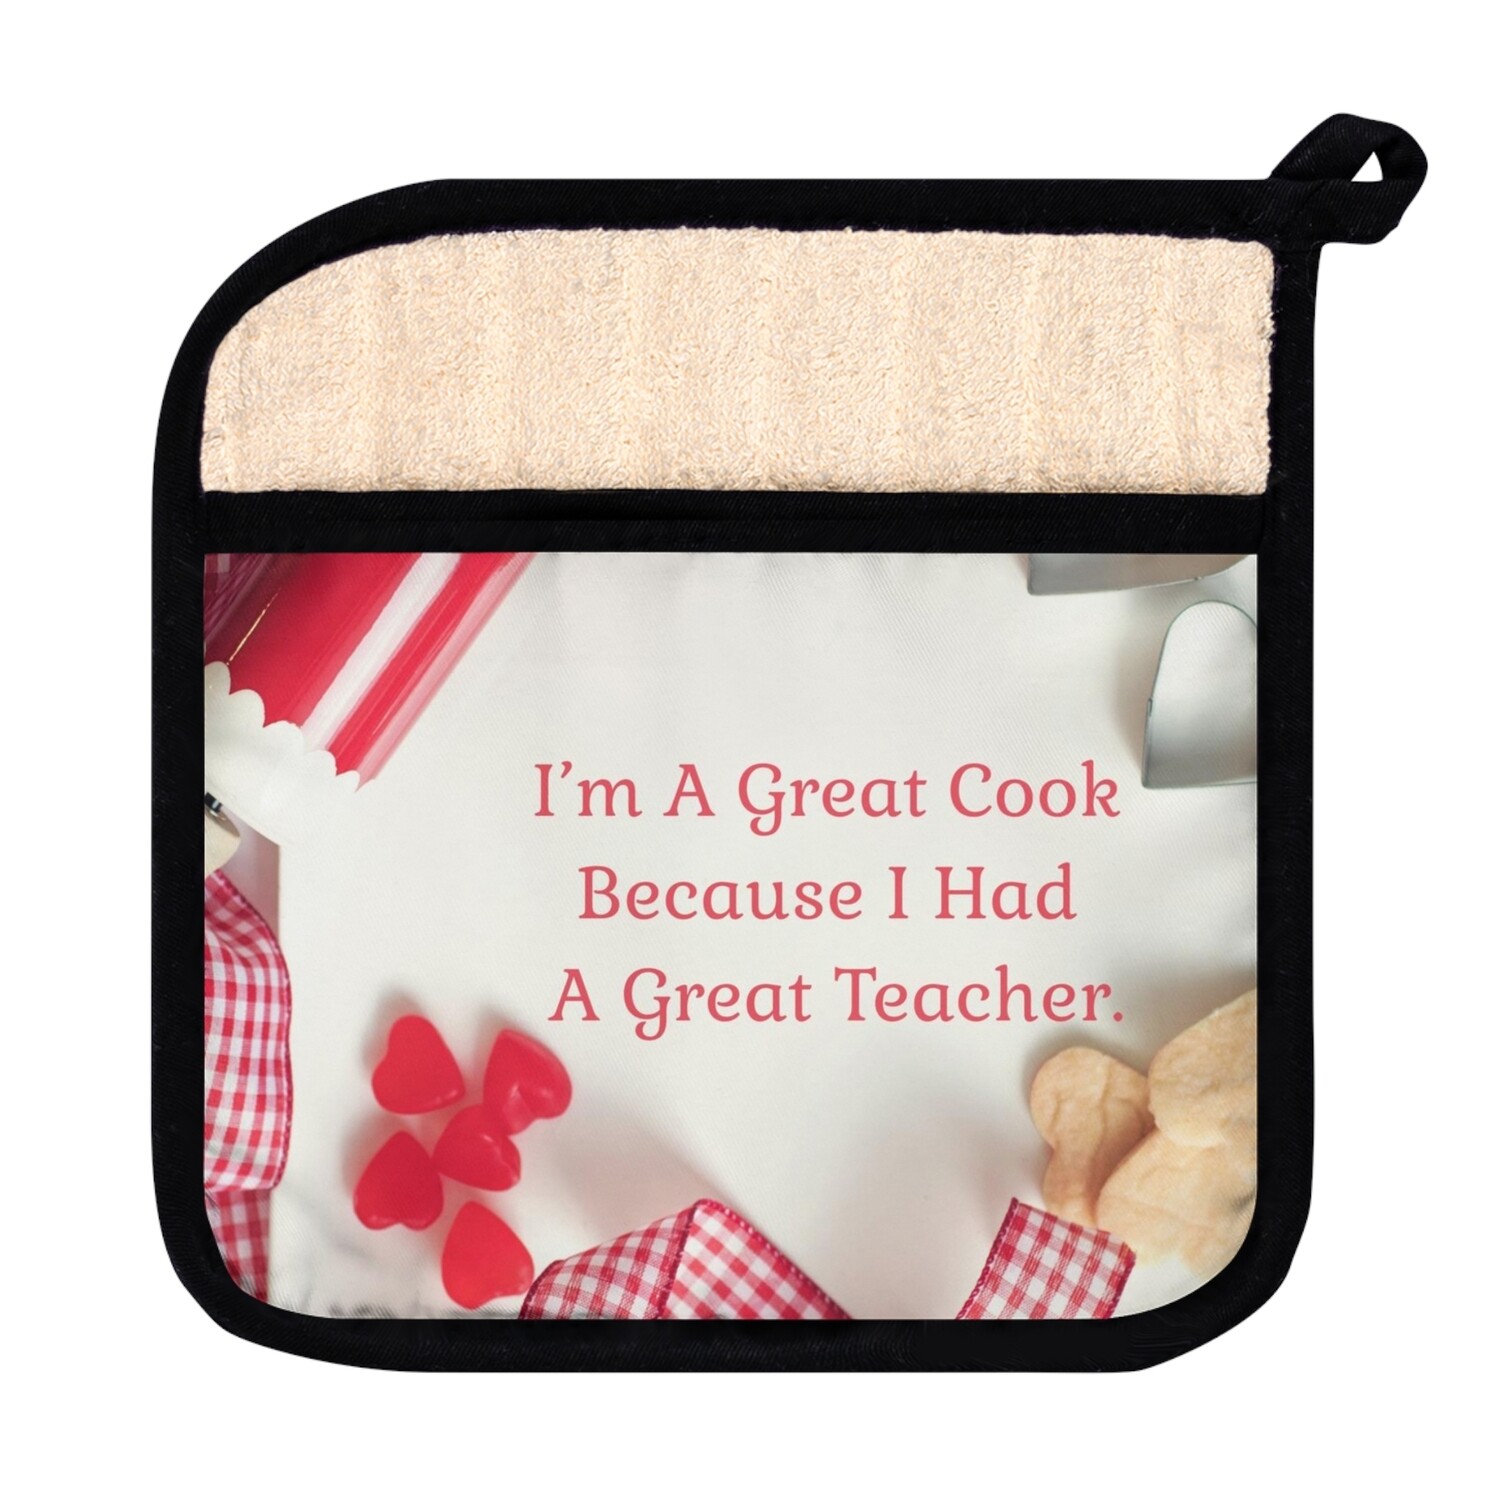 Pot Holders - Choice of 6 Perfect Gifts with Heartfelt Messages of Appreciation. $16.00 each